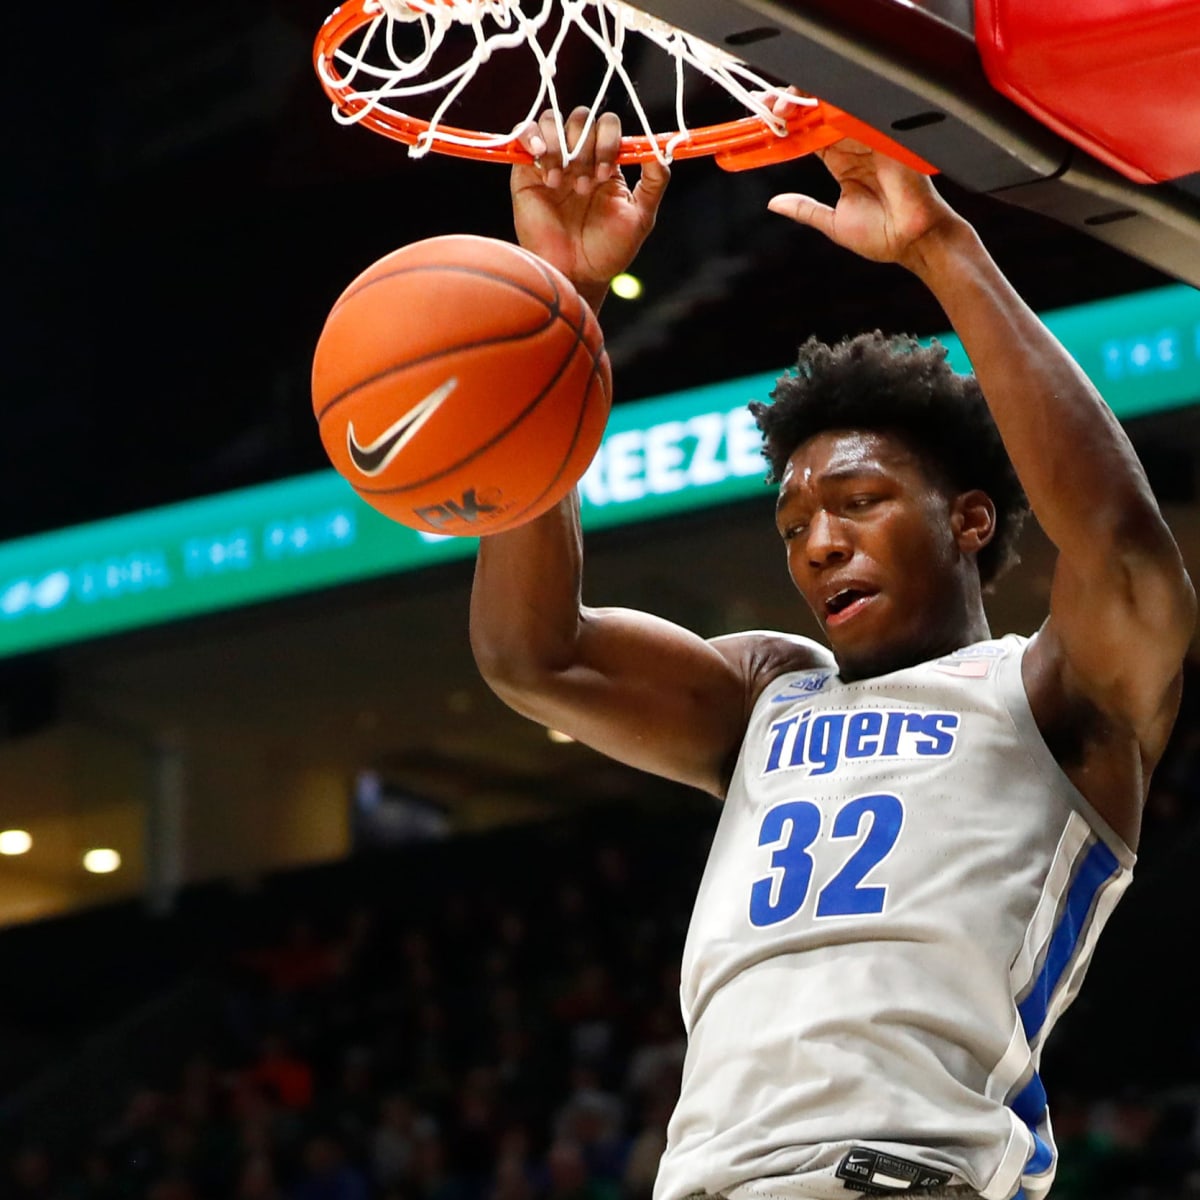 Golden State Warriors select James Wiseman with second pick of